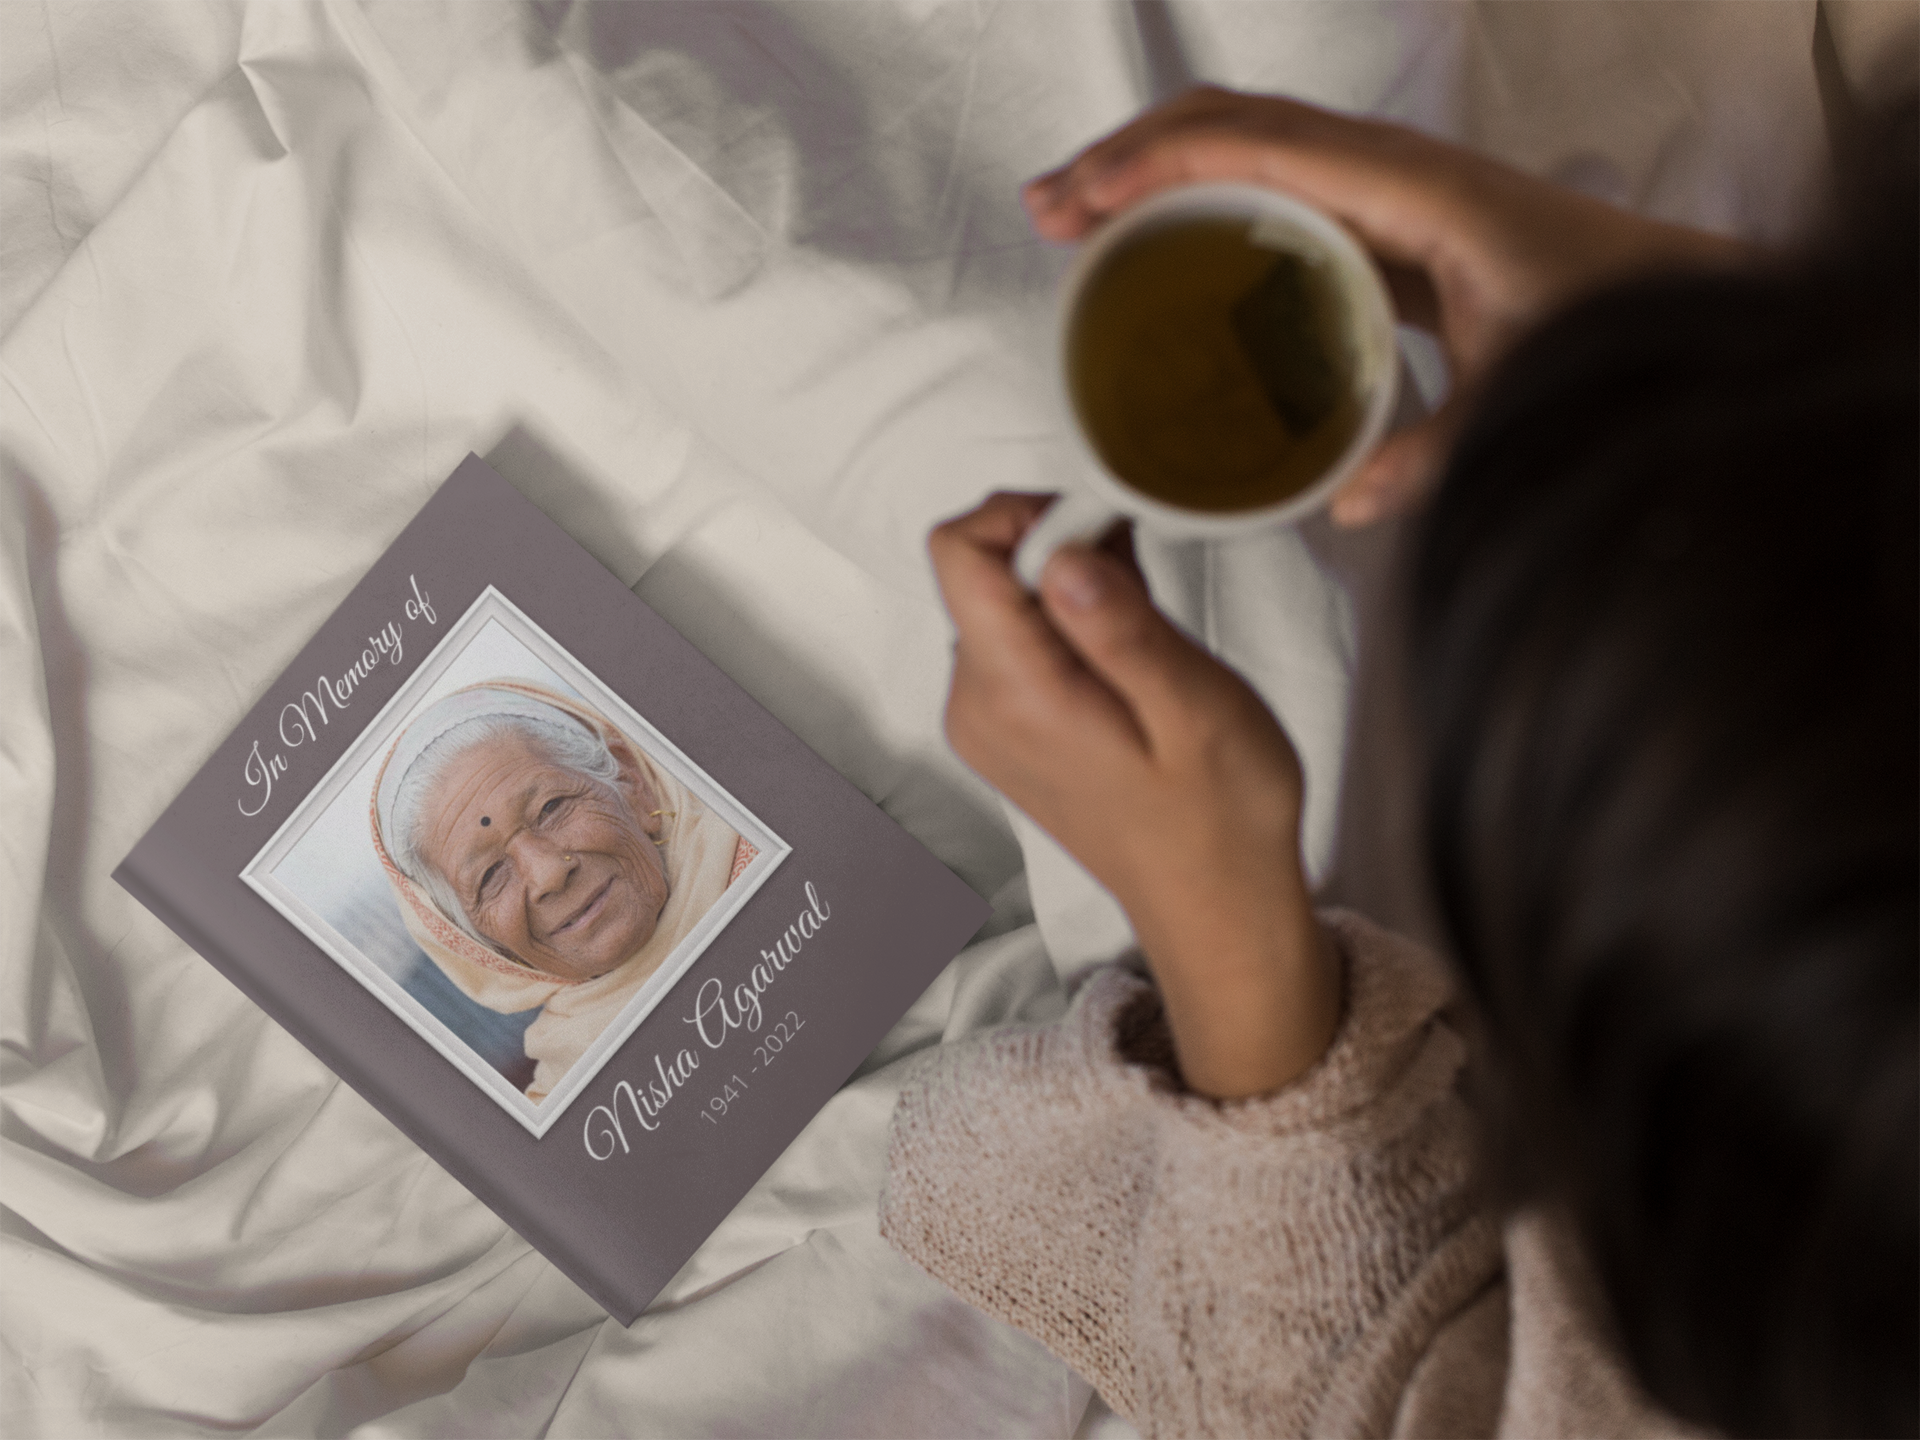 Offering a commemorative photo book as a gift to a grieving loved one